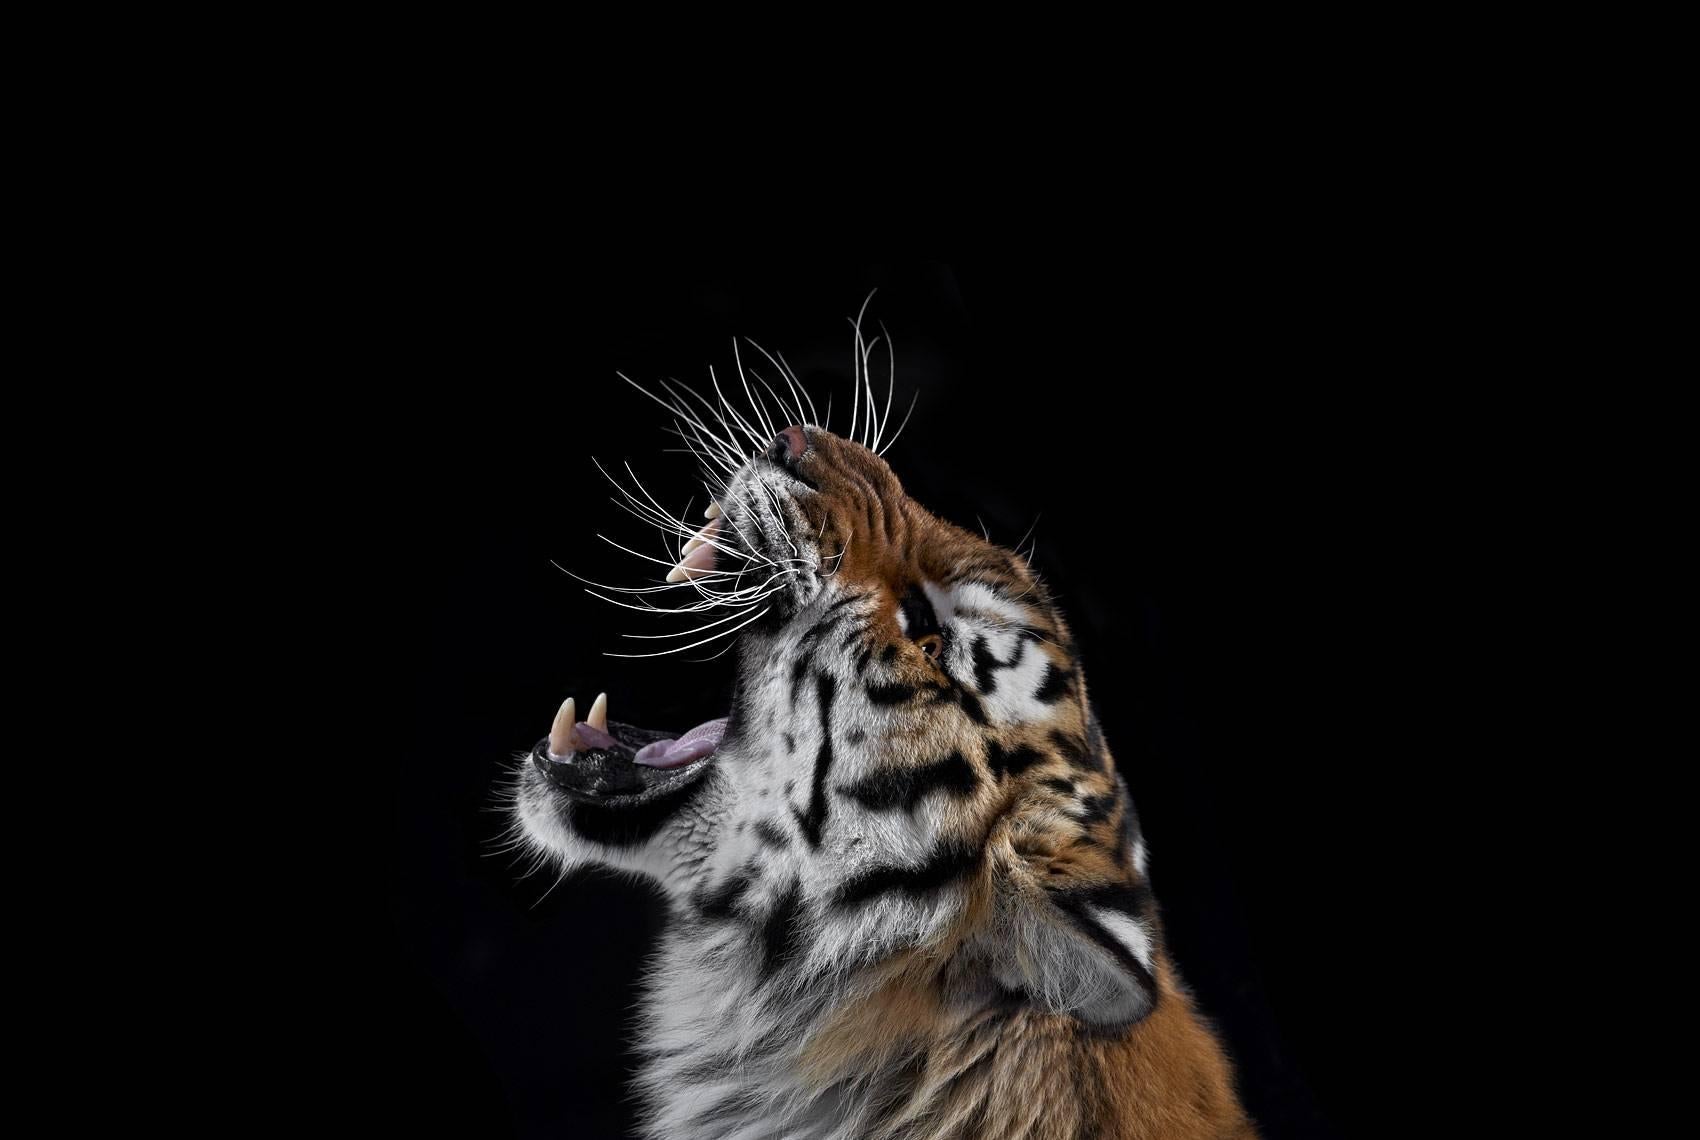 'Tiger #3, Los Angeles, CA, 2010' is a limited-edition photograph by contemporary artist Brad Wilson from the ‘Affinity’ series which features studio portraits of wild animals. 

This photograph is sold unframed as a print only. It is available in 4